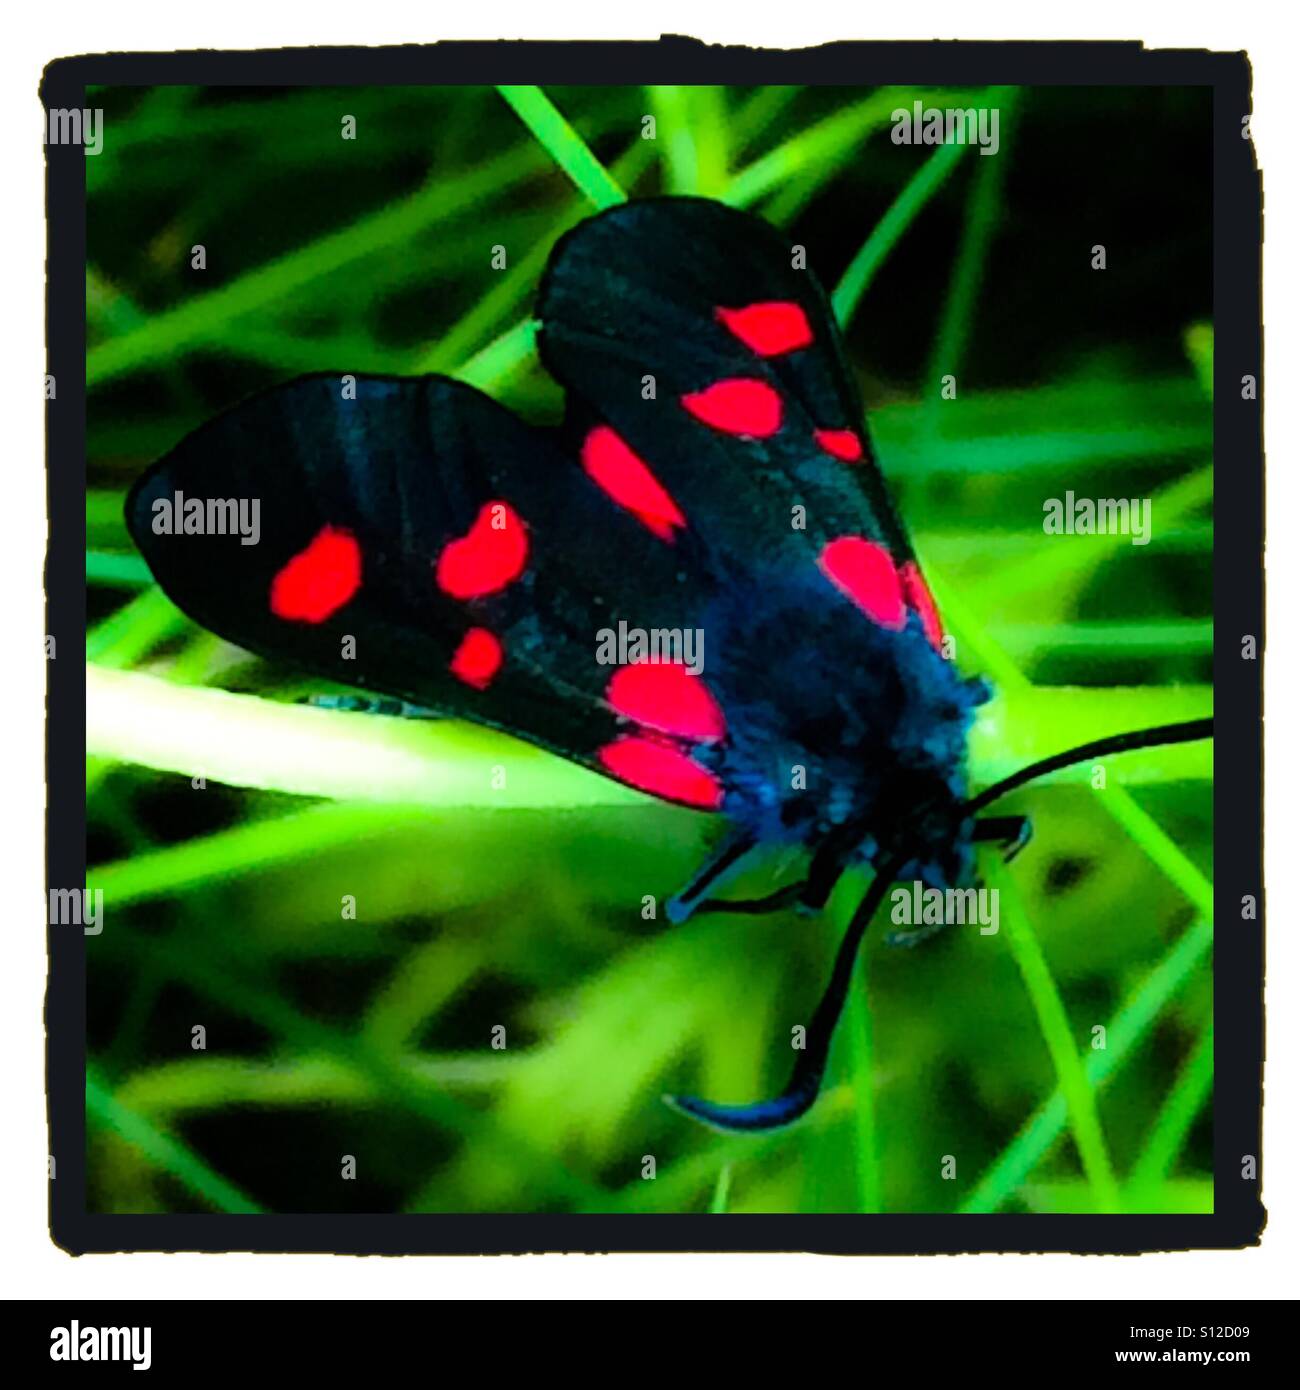 Moth with black and red spotted wings resting on grass Stock Photo